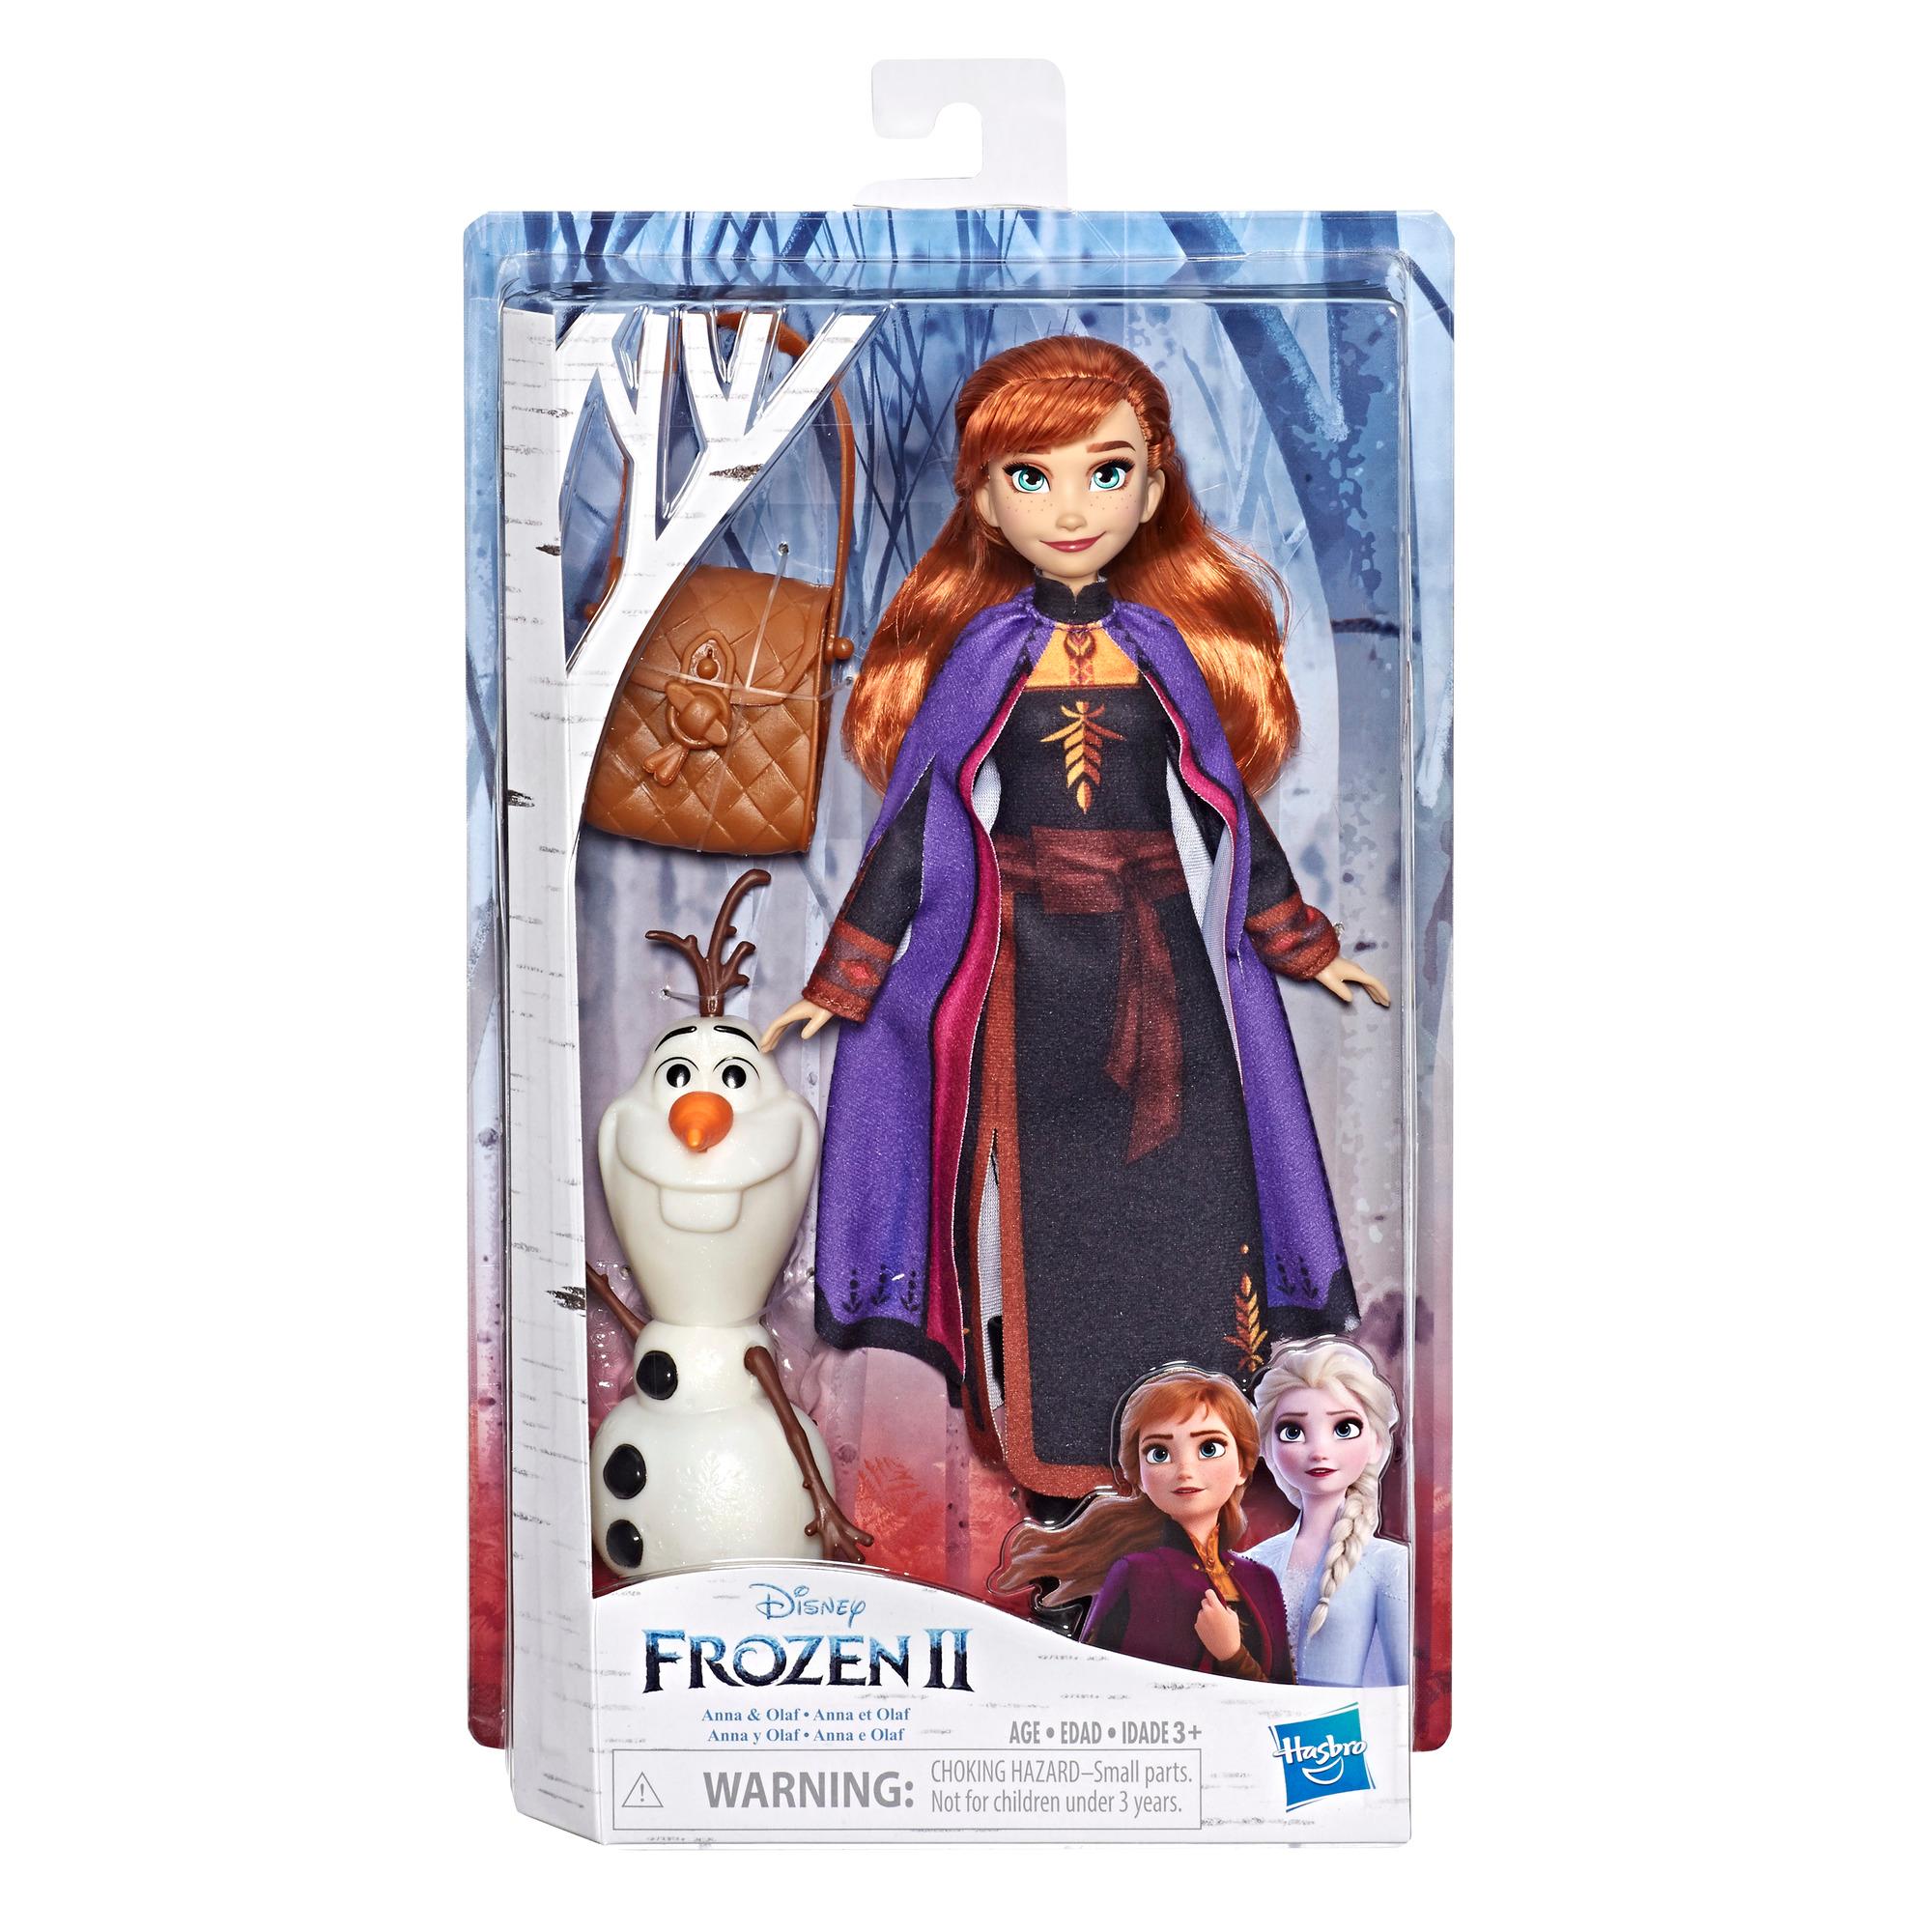 sml Olaf all perfect condition NEW 2 Left Anna Frozen Sweet Fashion:6.2" Elsa 